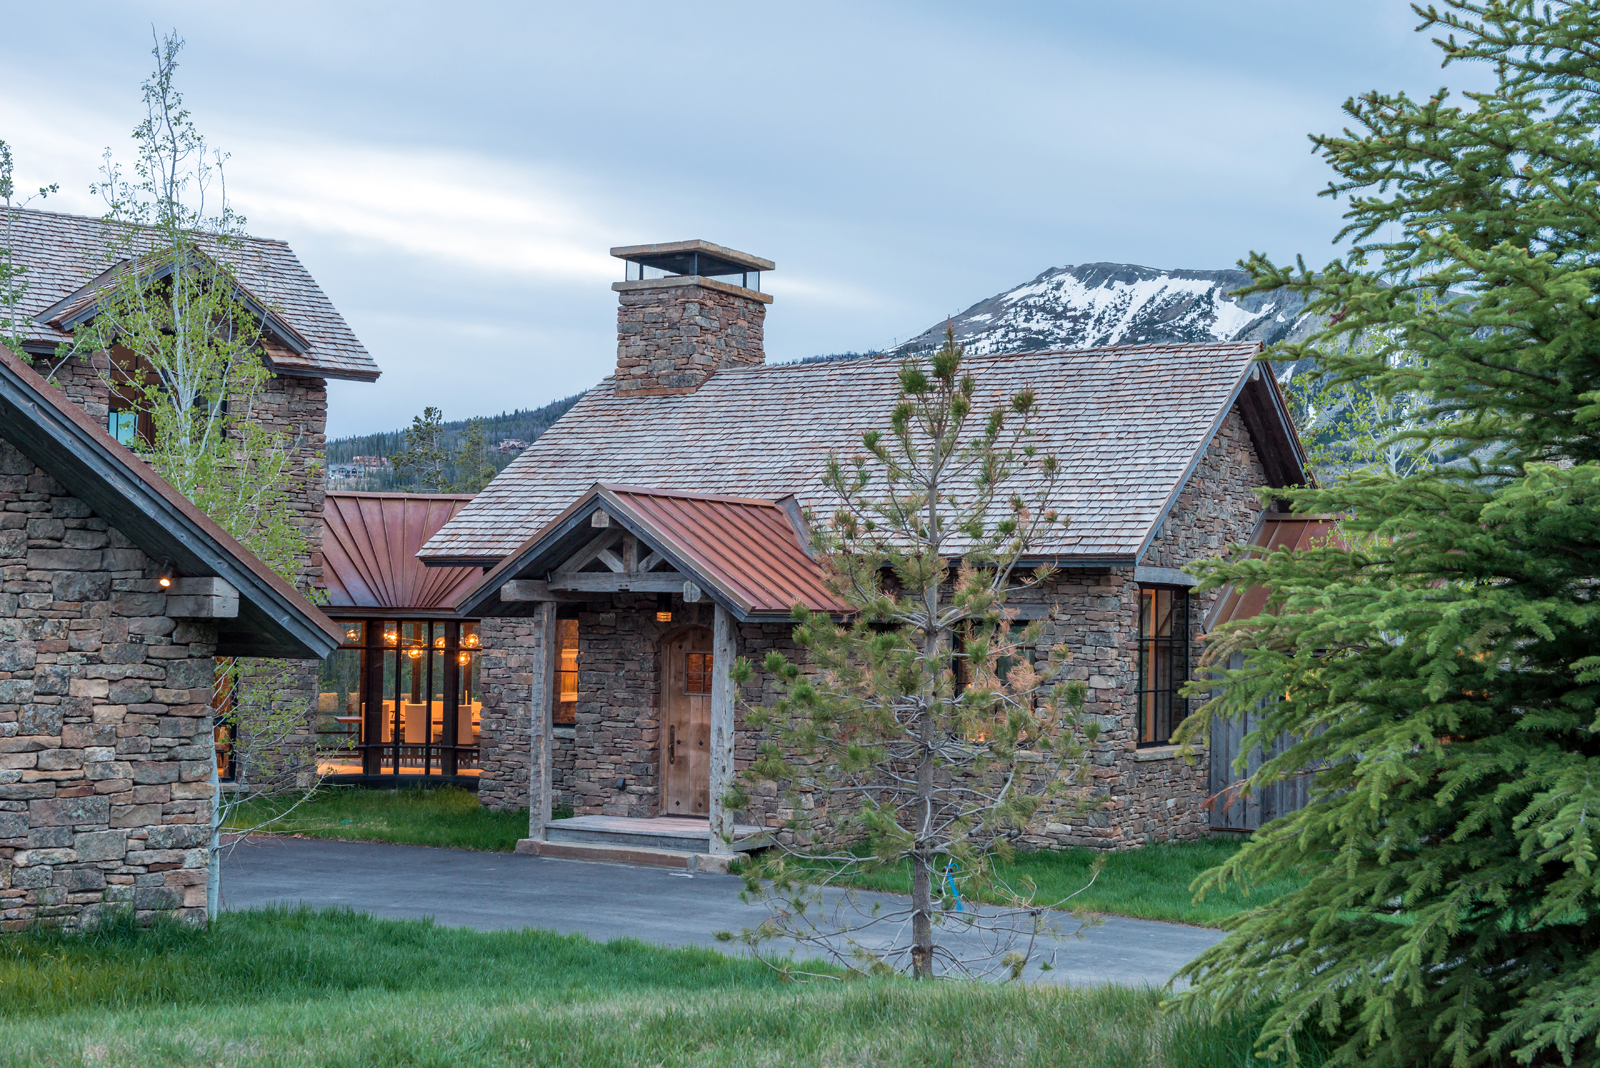 A Montana Yellowstone Club house by JLF Architects and WRJ Design combines rustic with contemporary (photo by Audrey Hall; not from “Natural Elegance” book).